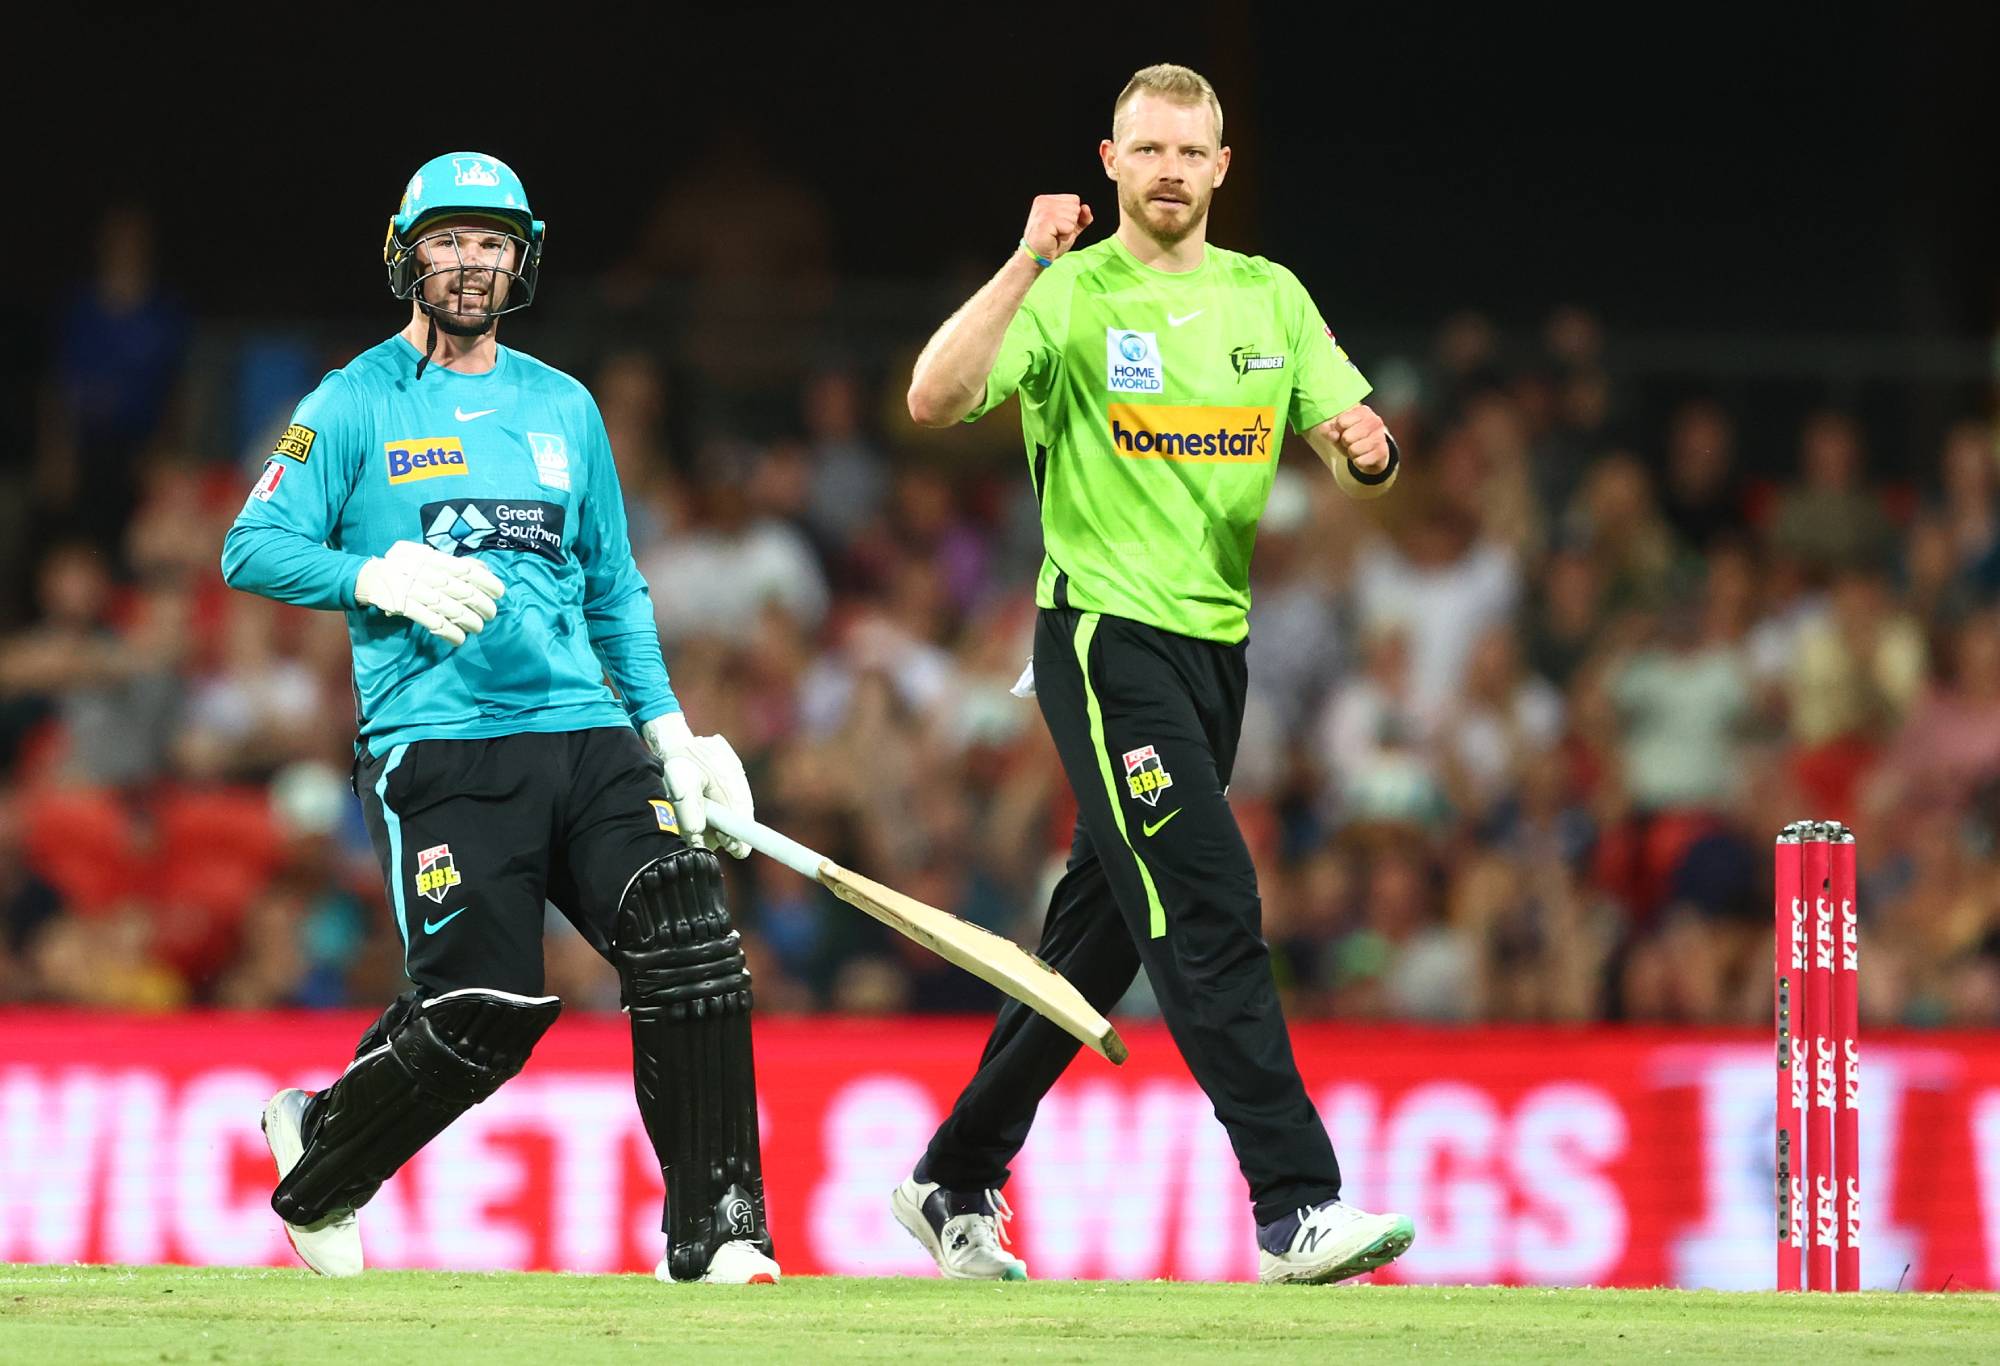 GOLD COAST, AUSTRALIA - DECEMBER 29: Nathan McAndrew of the Thunder celebrates dismissing Colin Munro of the Heat during the Men's Big Bash League match between the Brisbane Heat and the Sydney Thunder at Metricon Stadium, on December 29, 2022, in Gold Coast, Australia. (Photo by Chris Hyde/Getty Images)